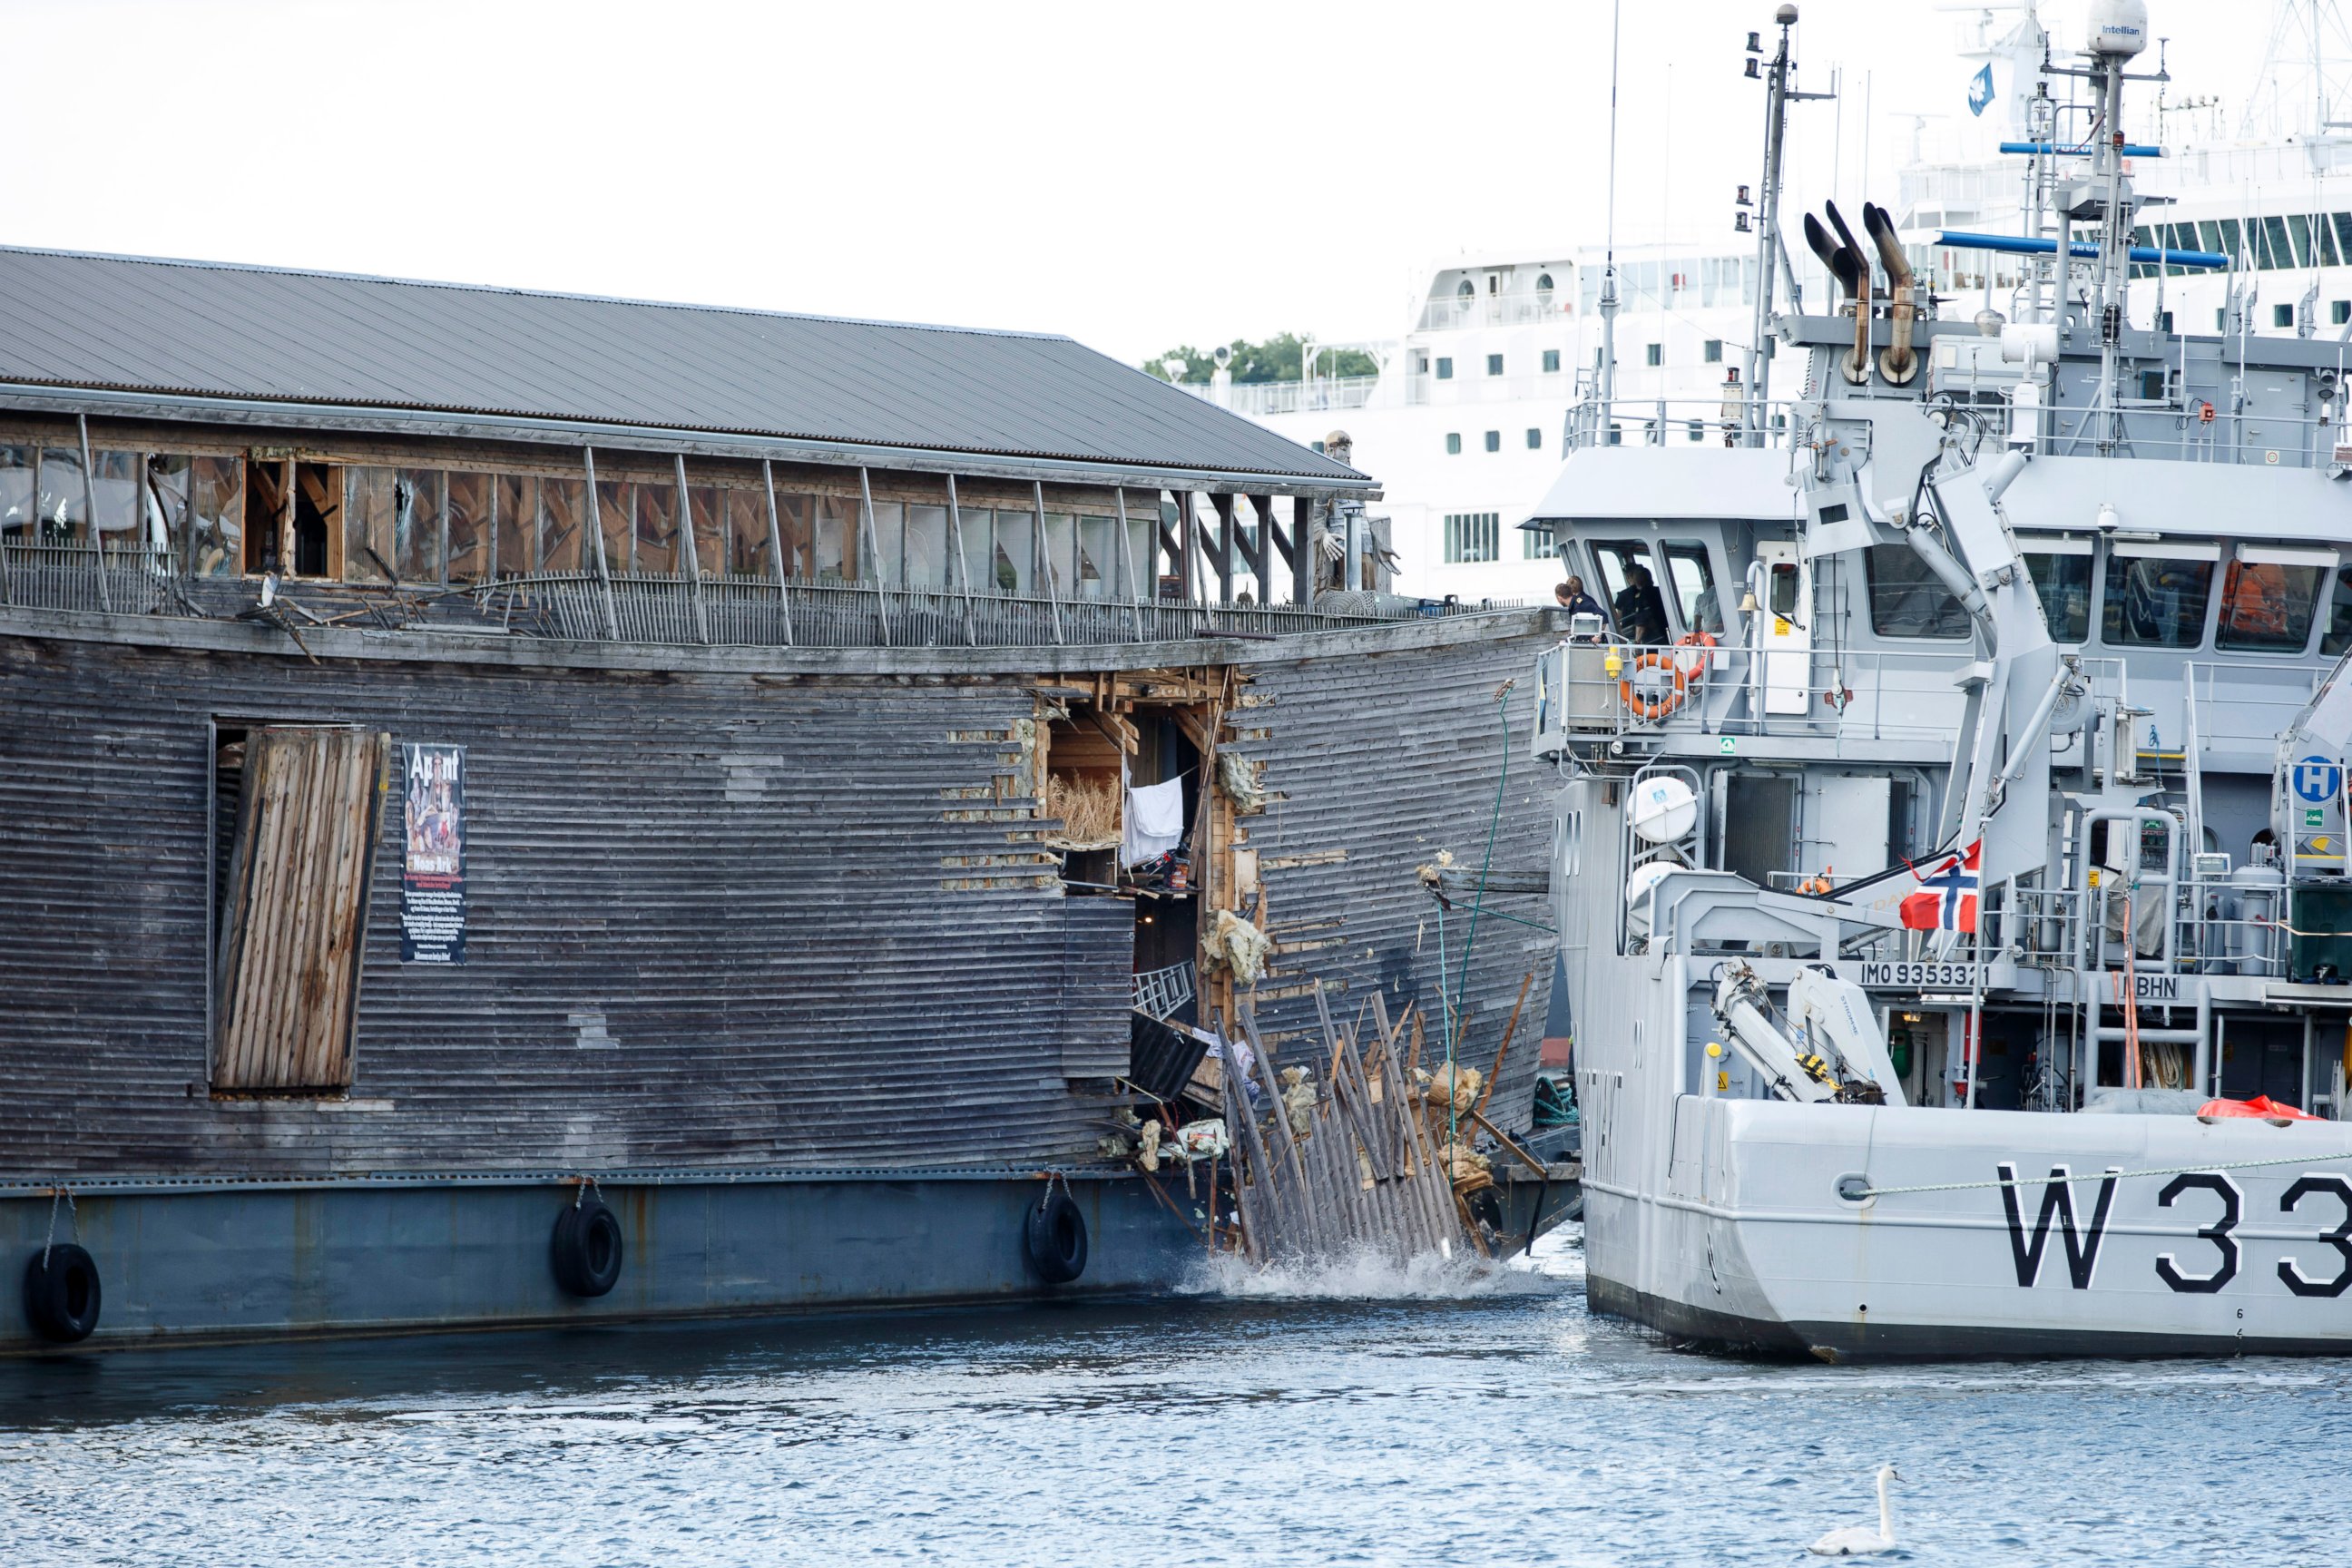 PHOTO: The damage of the hull of a wooden exhibition ship built as a representation of Noah's Ark after it crashed into a moored Coast Guard vessel in Oslo harbor, June 10, 2016, in Oslo.